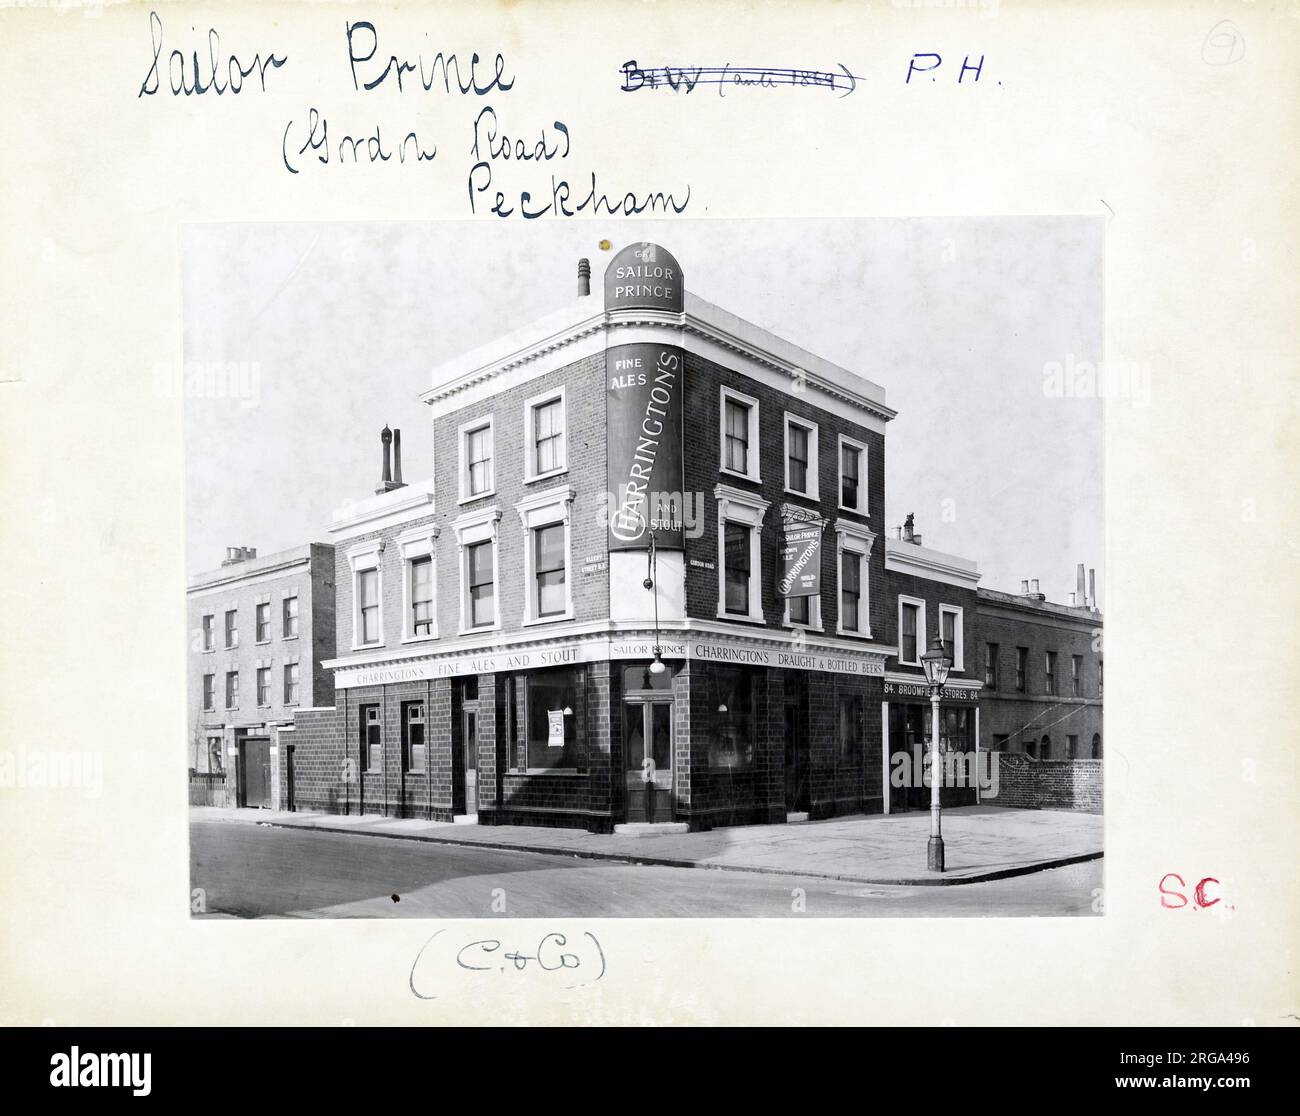 Photograph of Sailor Prince PH, Peckham, London. The main side of the print (shown here) depicts: Corner on view of the pub.  The back of the print (available on request) details: Trading Record 1929 . 1961 for the Sailor Prince, Peckham, London SE15 3RG. As of July 2018 . Converted to residential use by March 2011. Stock Photo